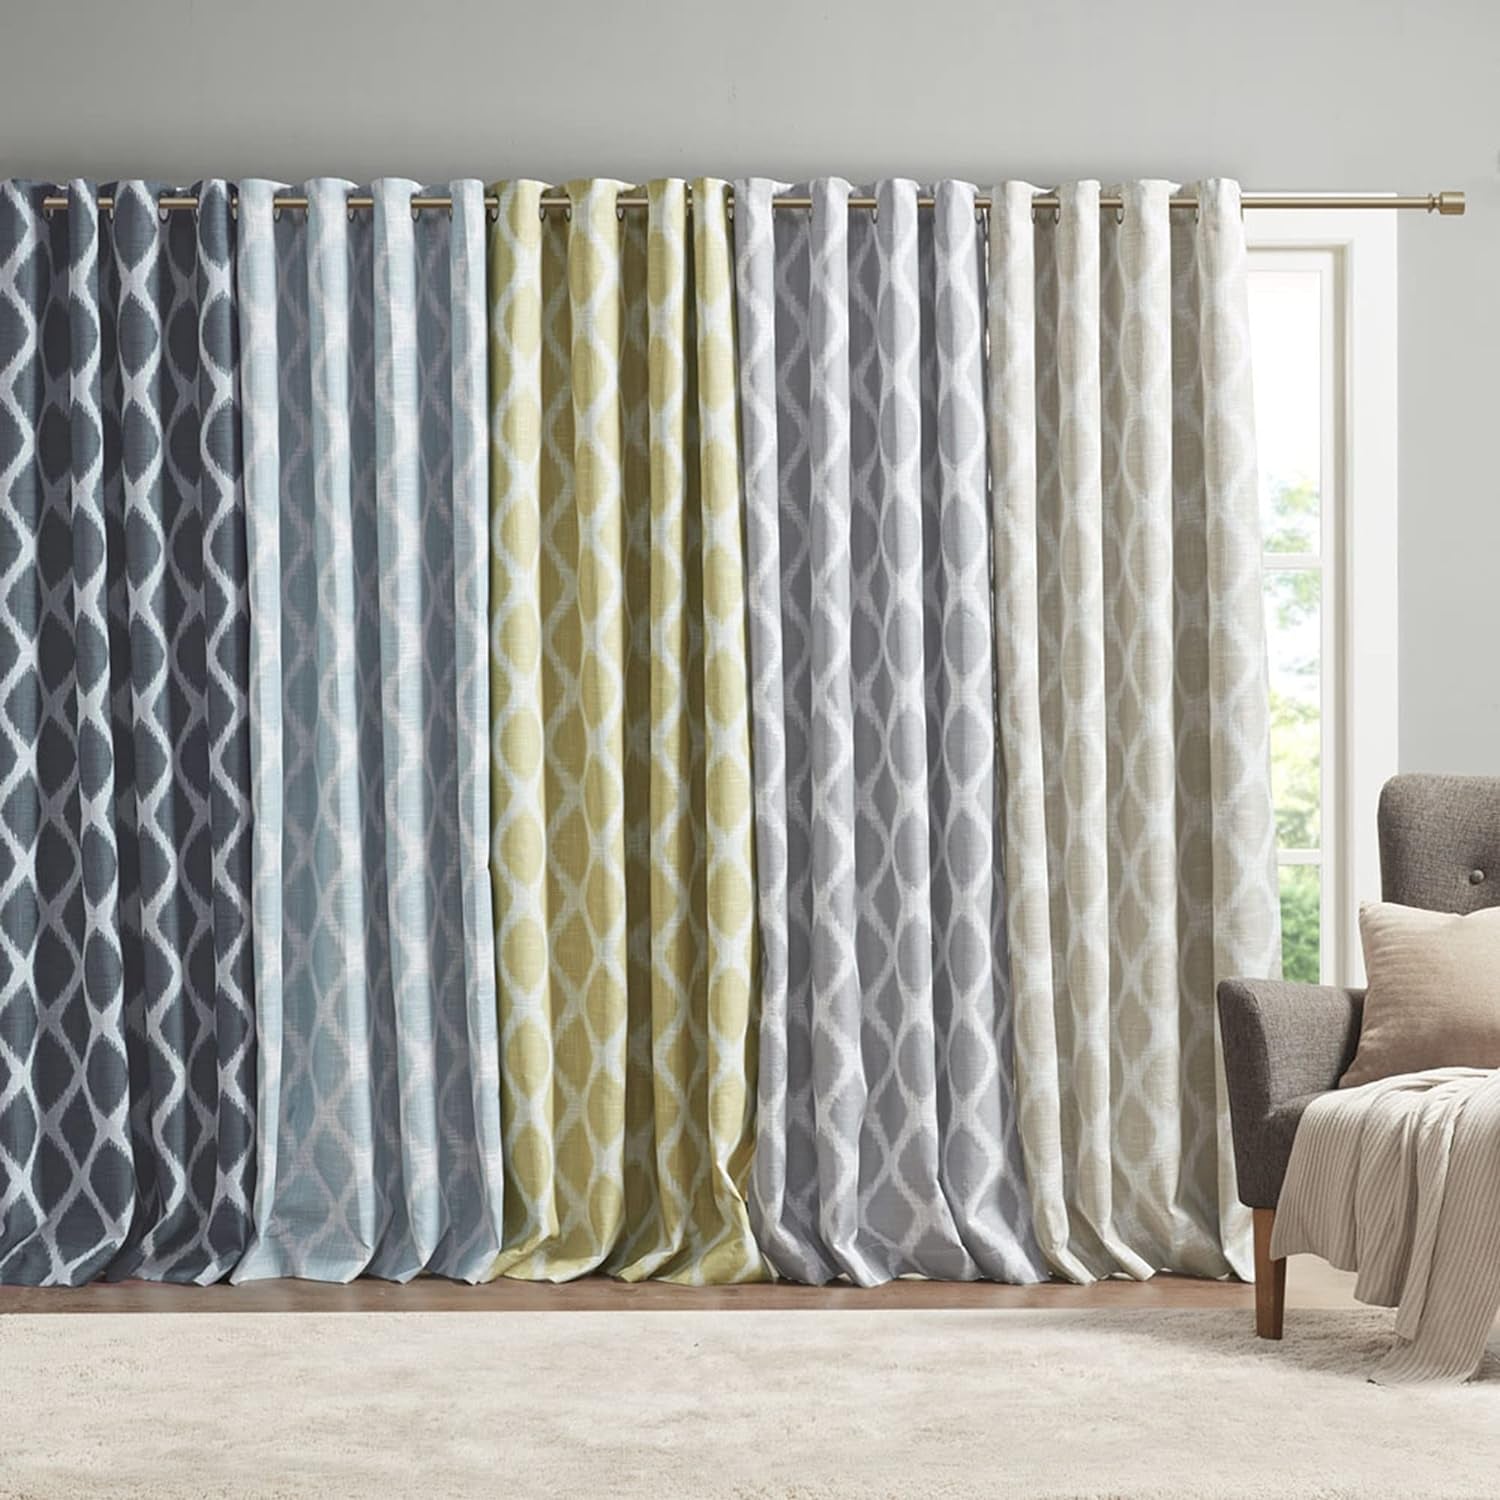 Sun Smart Blakesly Blackout Curtains Patio Window, Ikat Print, Grommet Top Living Room Decor, Living Room Decor, Thermal Insulated Light Blocking Drape for Bedroom and Apartments, 50" X 84", Grey  E&E Co. Ltd DBA JLA Home   